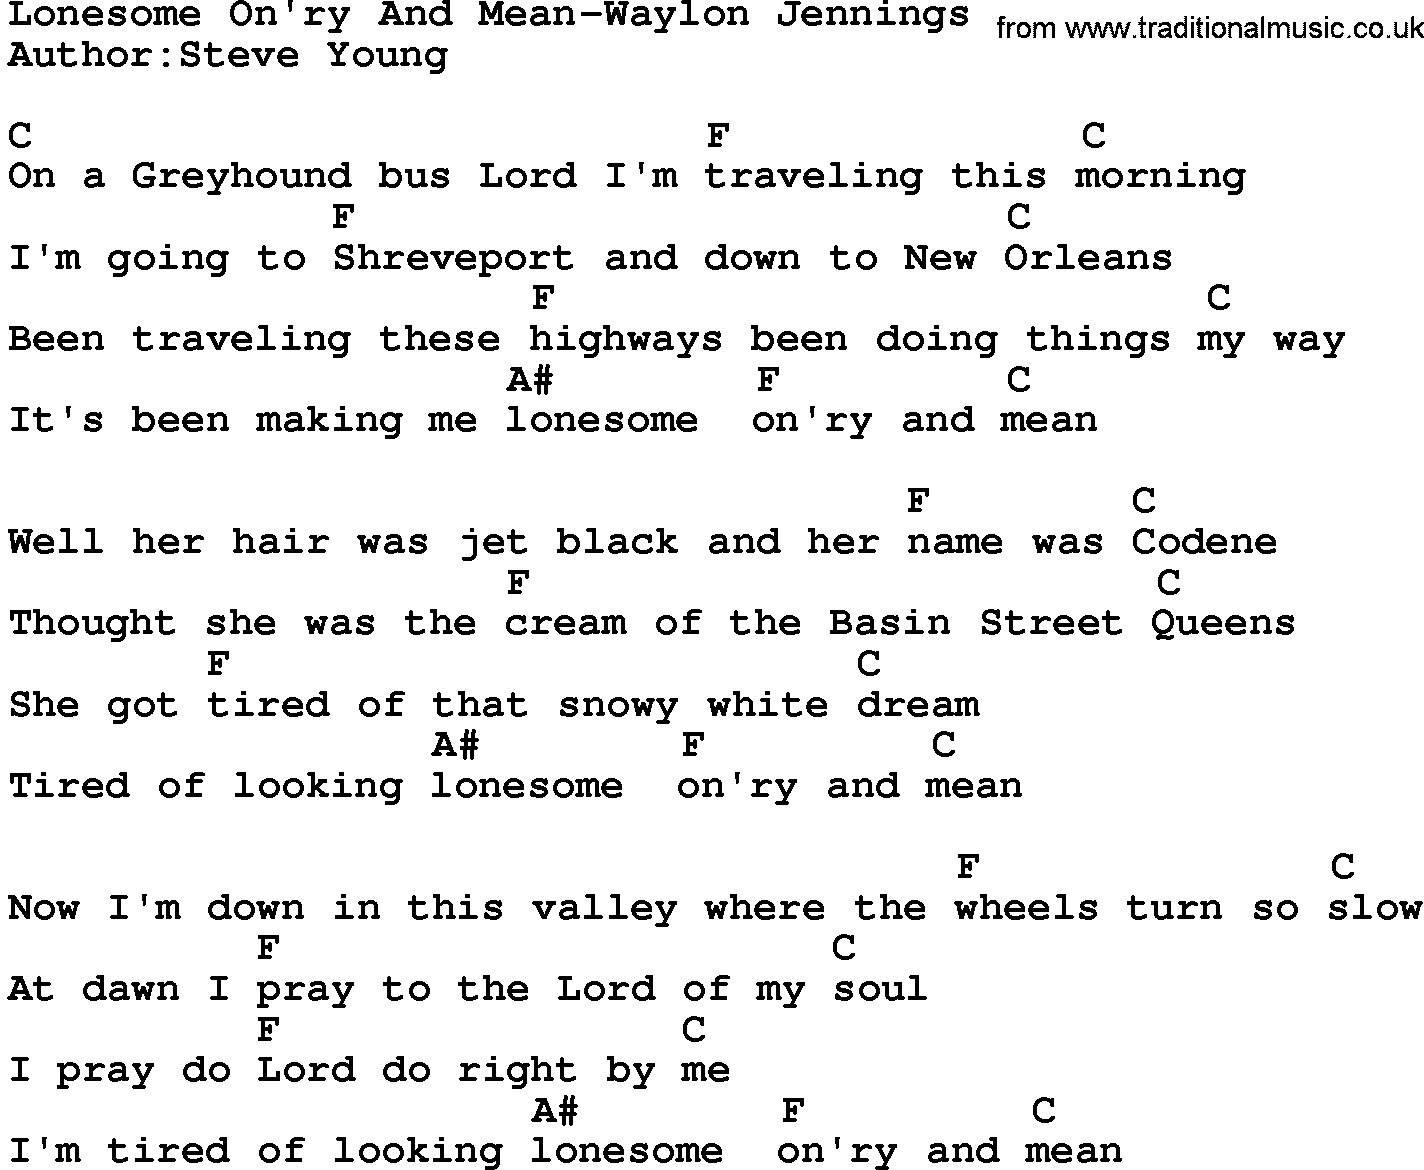 Country music song: Lonesome On'ry And Mean-Waylon Jennings lyrics and chords